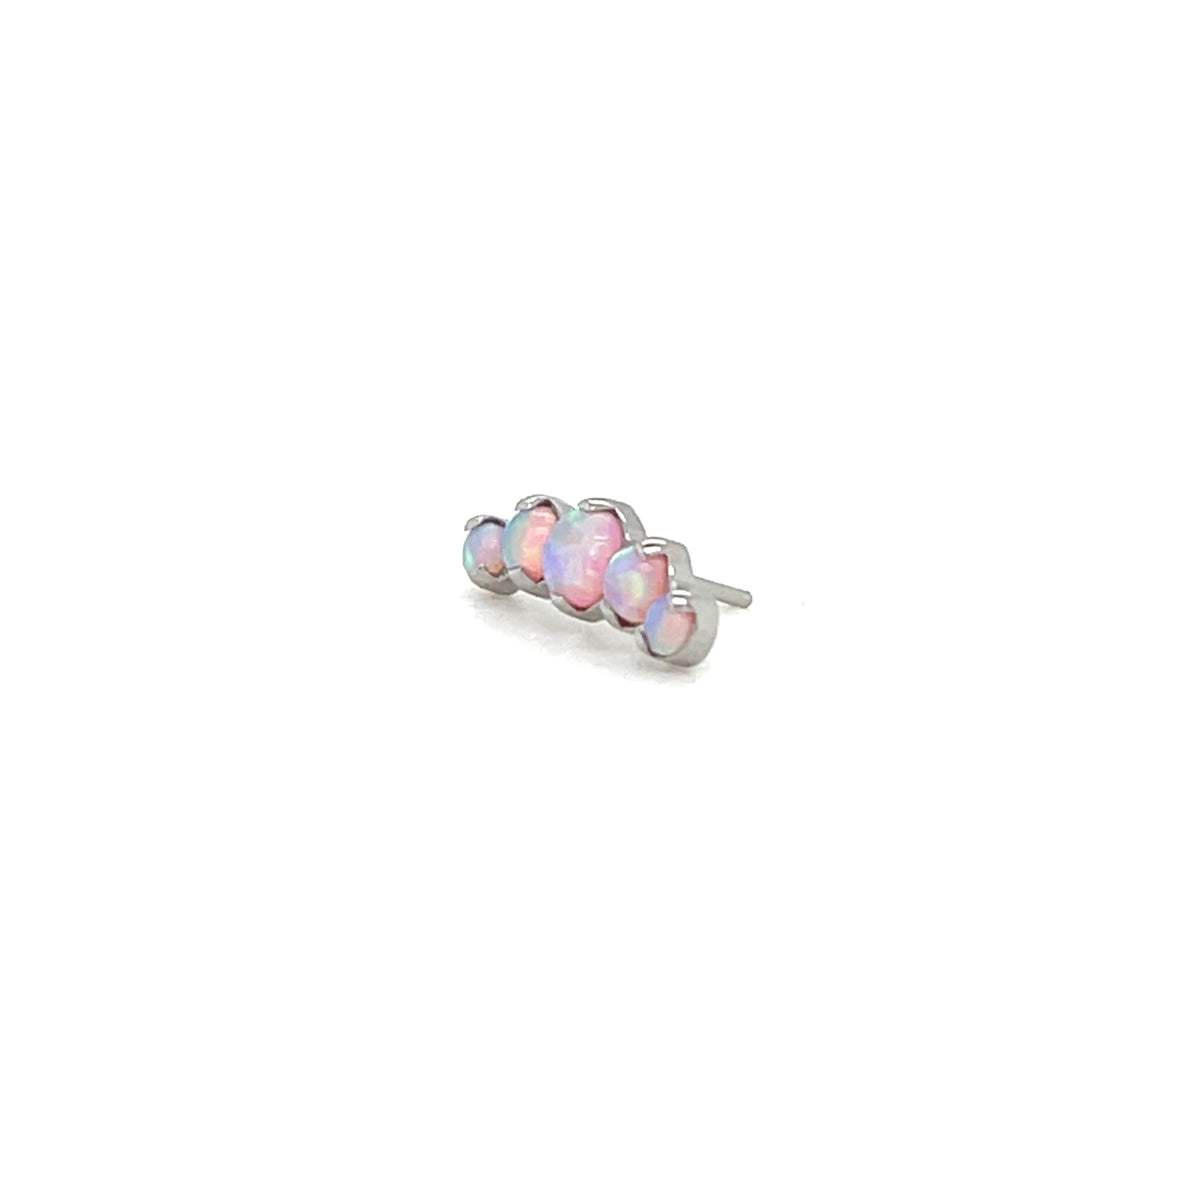 Industrial Strength Odyssey Prium Bubble Gum Pink Opal End Threadless